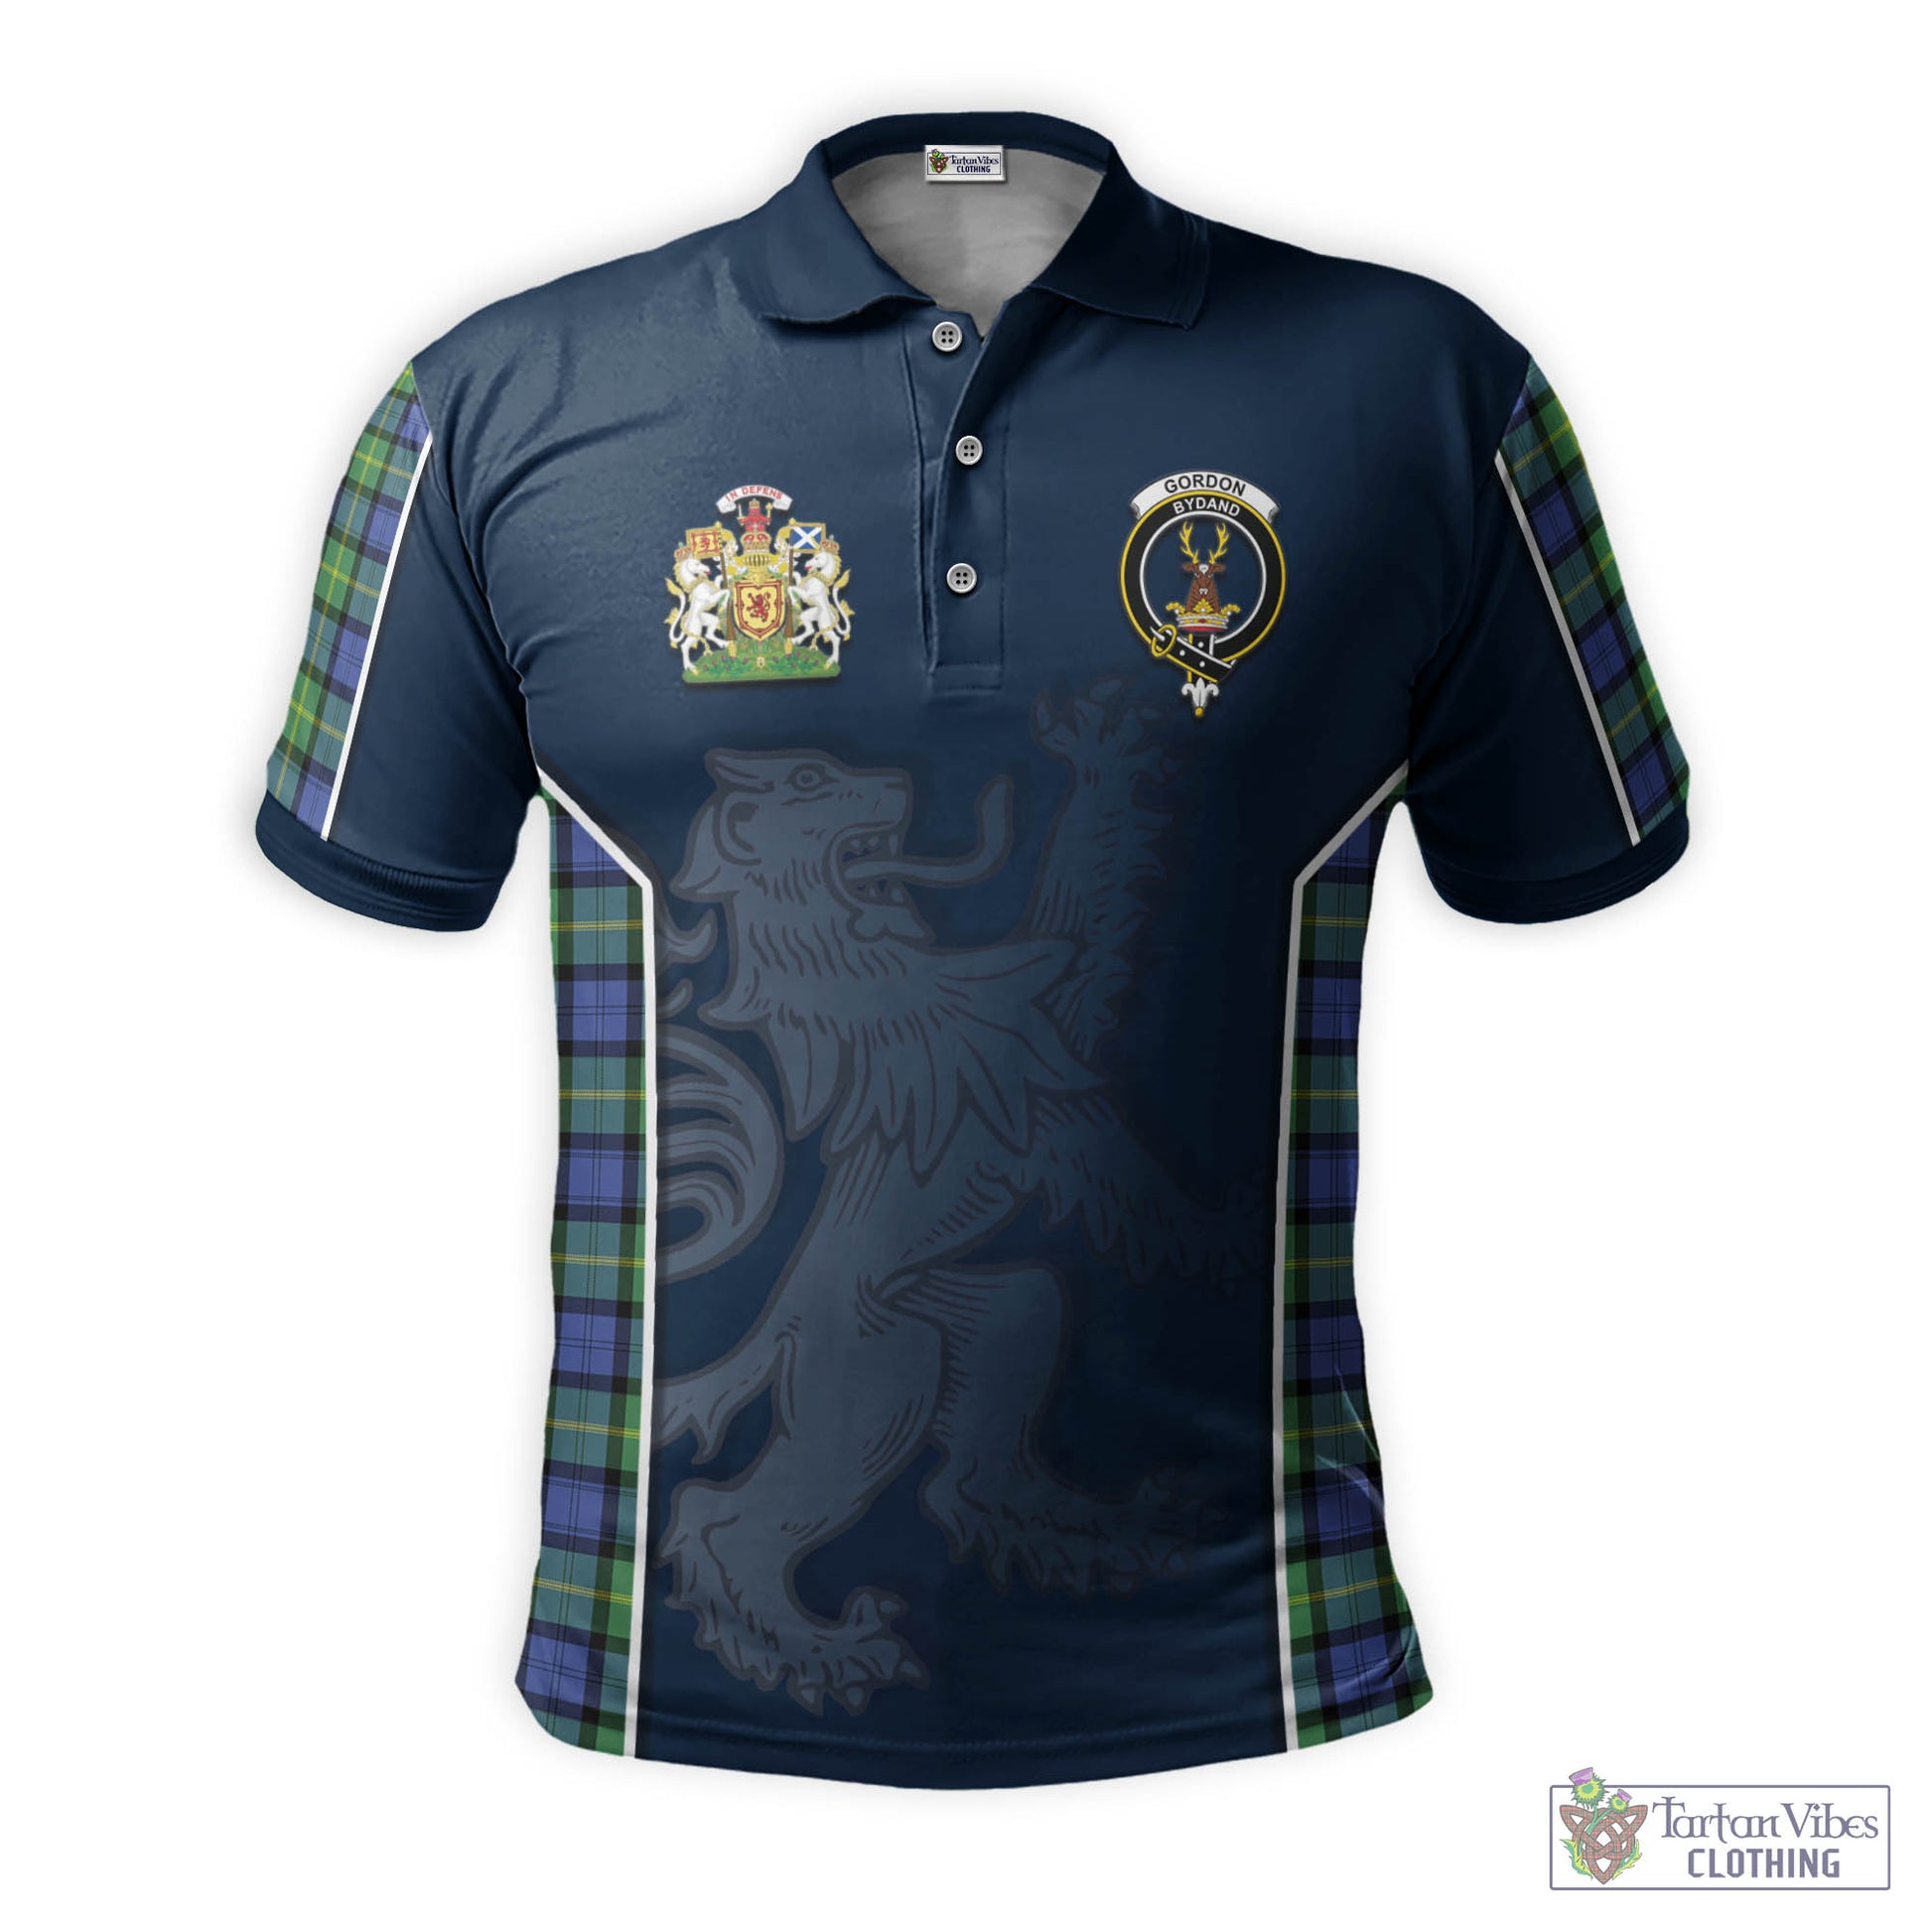 Tartan Vibes Clothing Gordon Old Ancient Tartan Men's Polo Shirt with Family Crest and Lion Rampant Vibes Sport Style